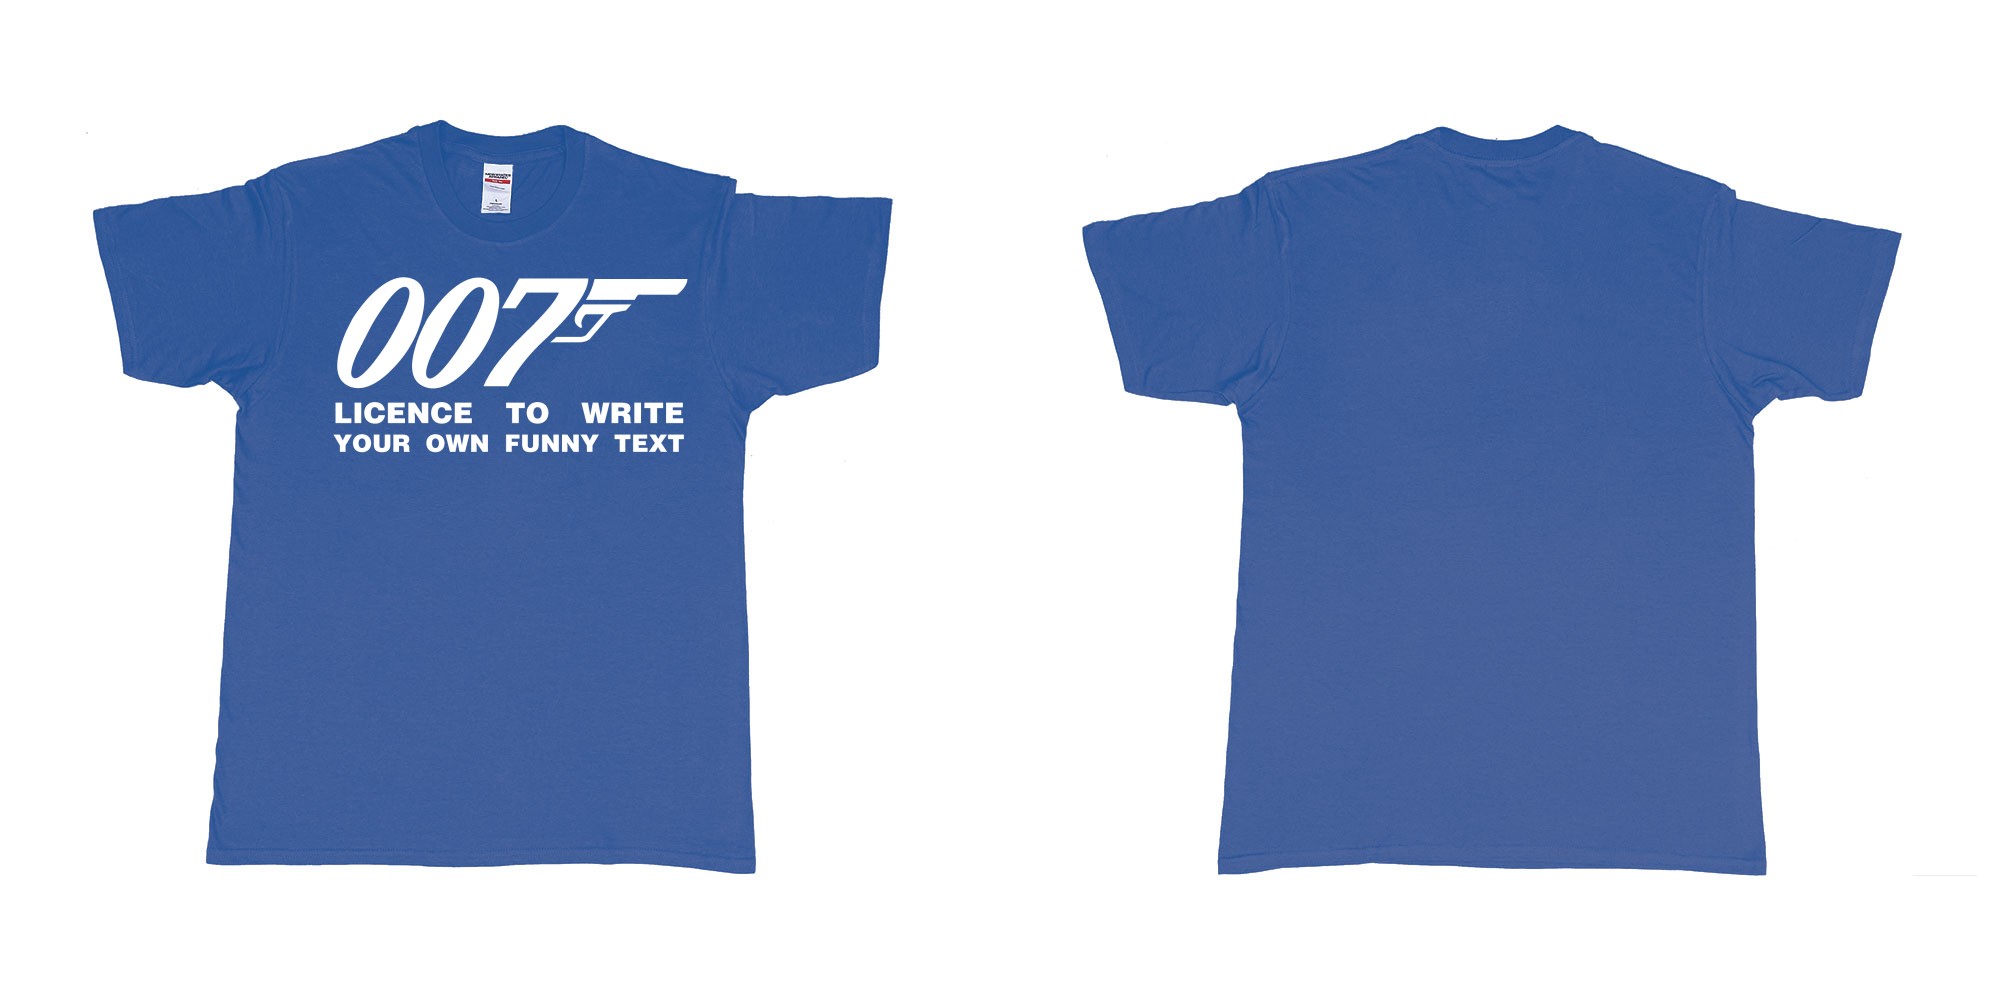 Custom tshirt design james bond logo licence to write own custom text print in fabric color royal-blue choice your own text made in Bali by The Pirate Way